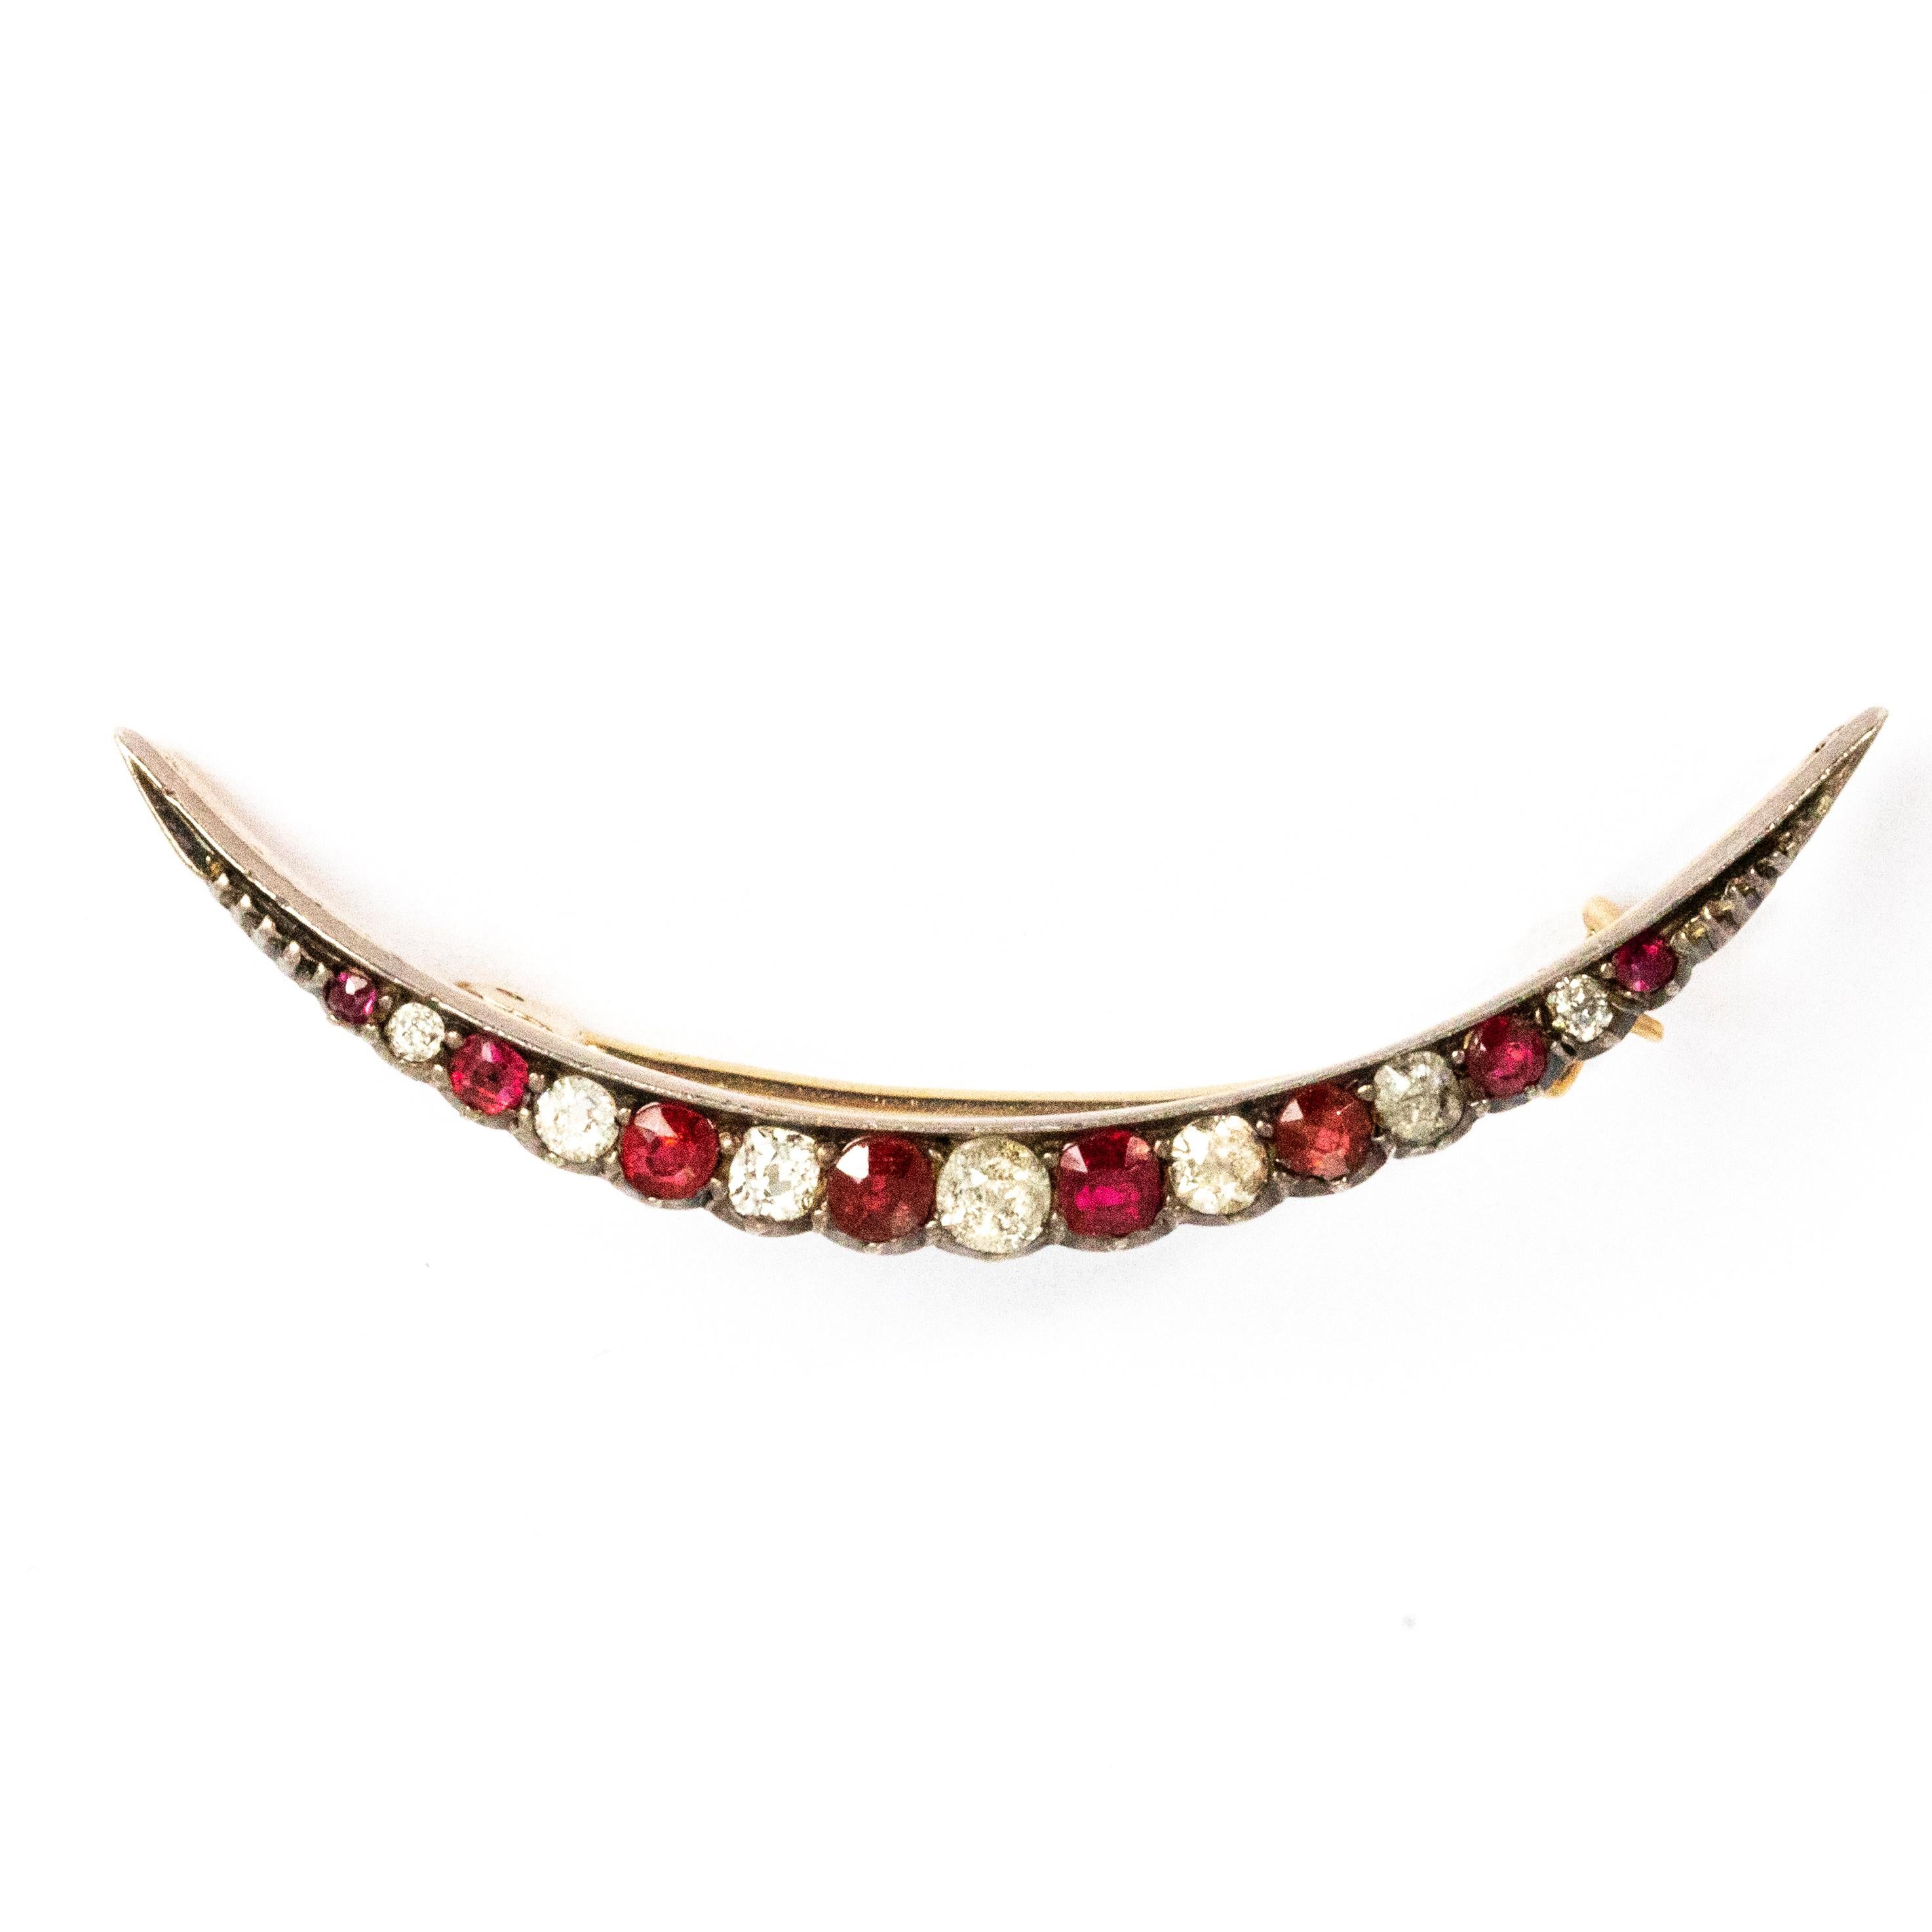 This stylish crescent brooch holds a total of 8 rubies and 7 diamonds. The rubies total approximately 68pts and the diamonds total aproximately 44pts. The brooch is modelled out of silver.

Brooch length: 2inches